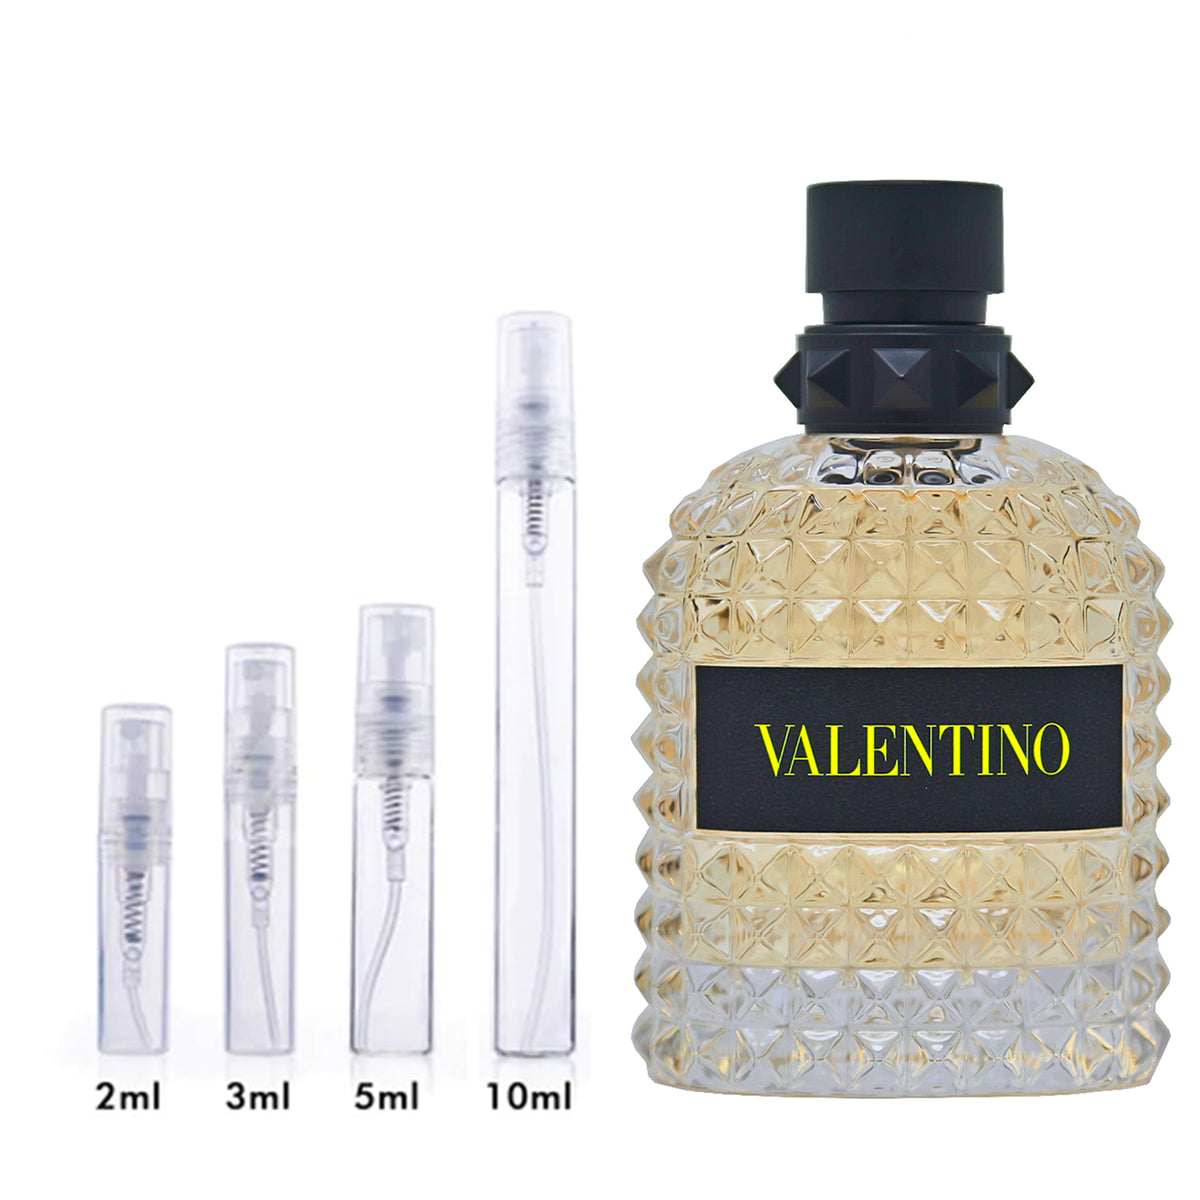 Uomo Born In Roma Yellow Valentino by Toilette Atomizer Sampler | Travel Scent Fragrance DecantX de Samples and Size Dream | Eau Perfume